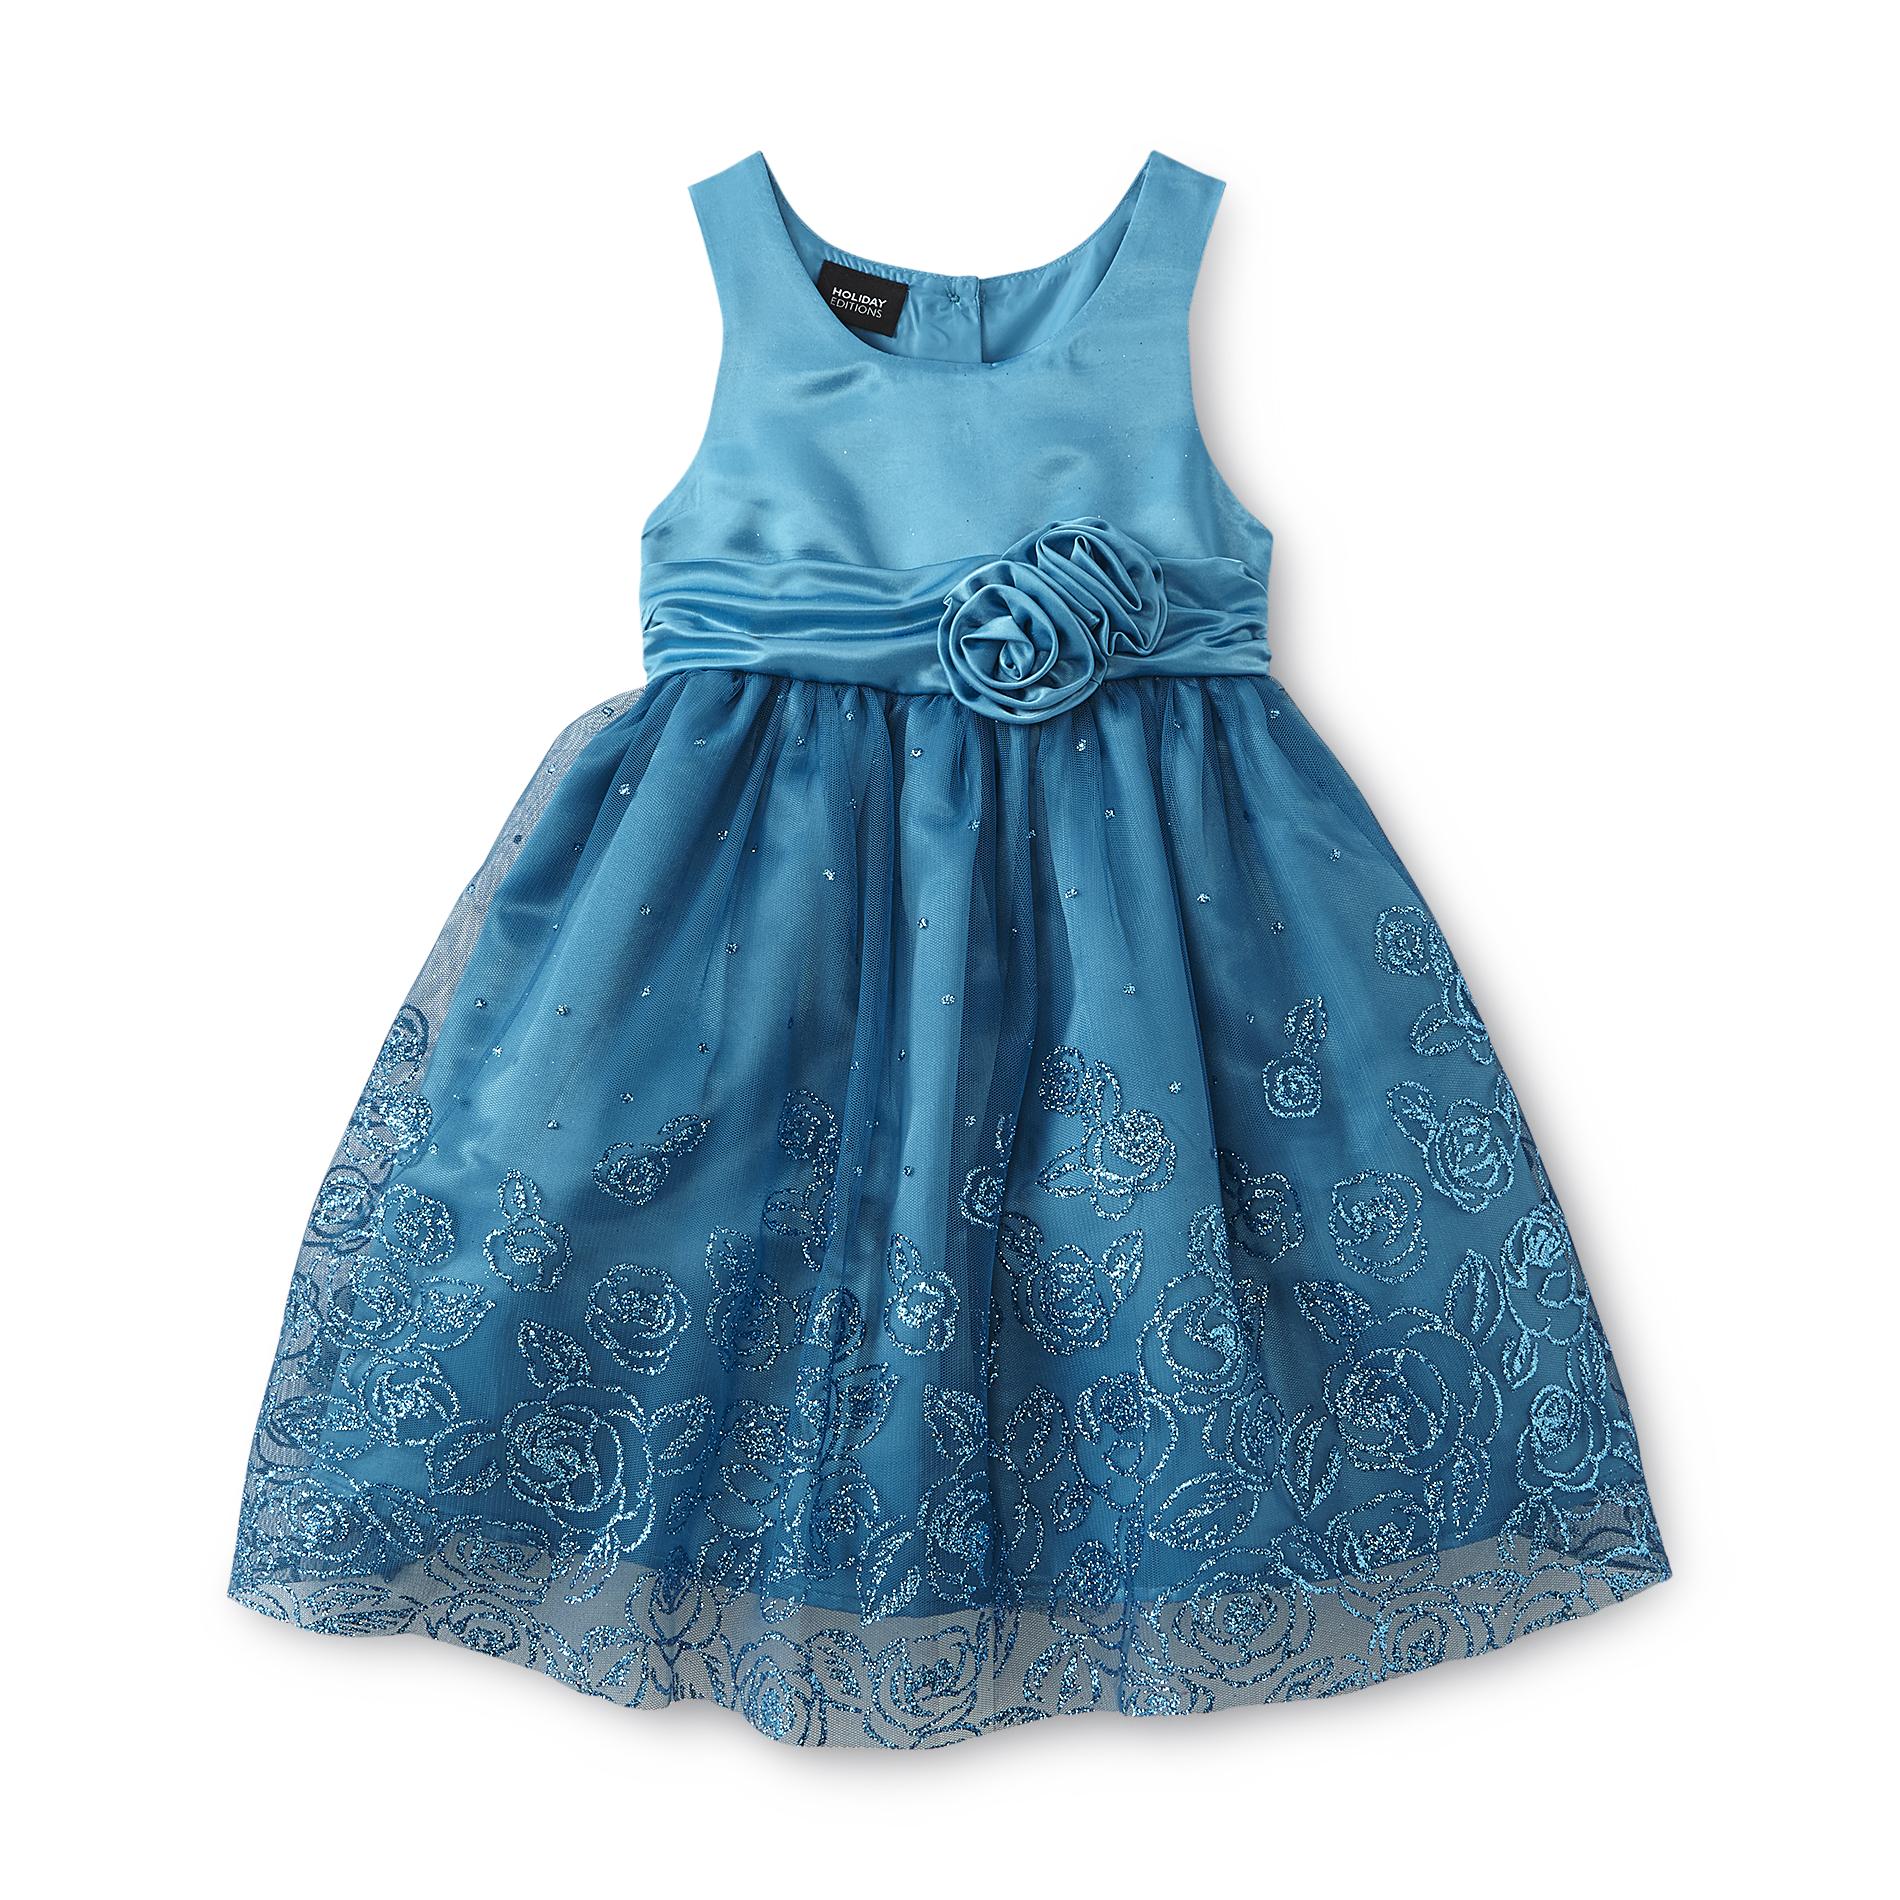 Holiday Editions Toddler Girl's Sleeveless Dress - Floral